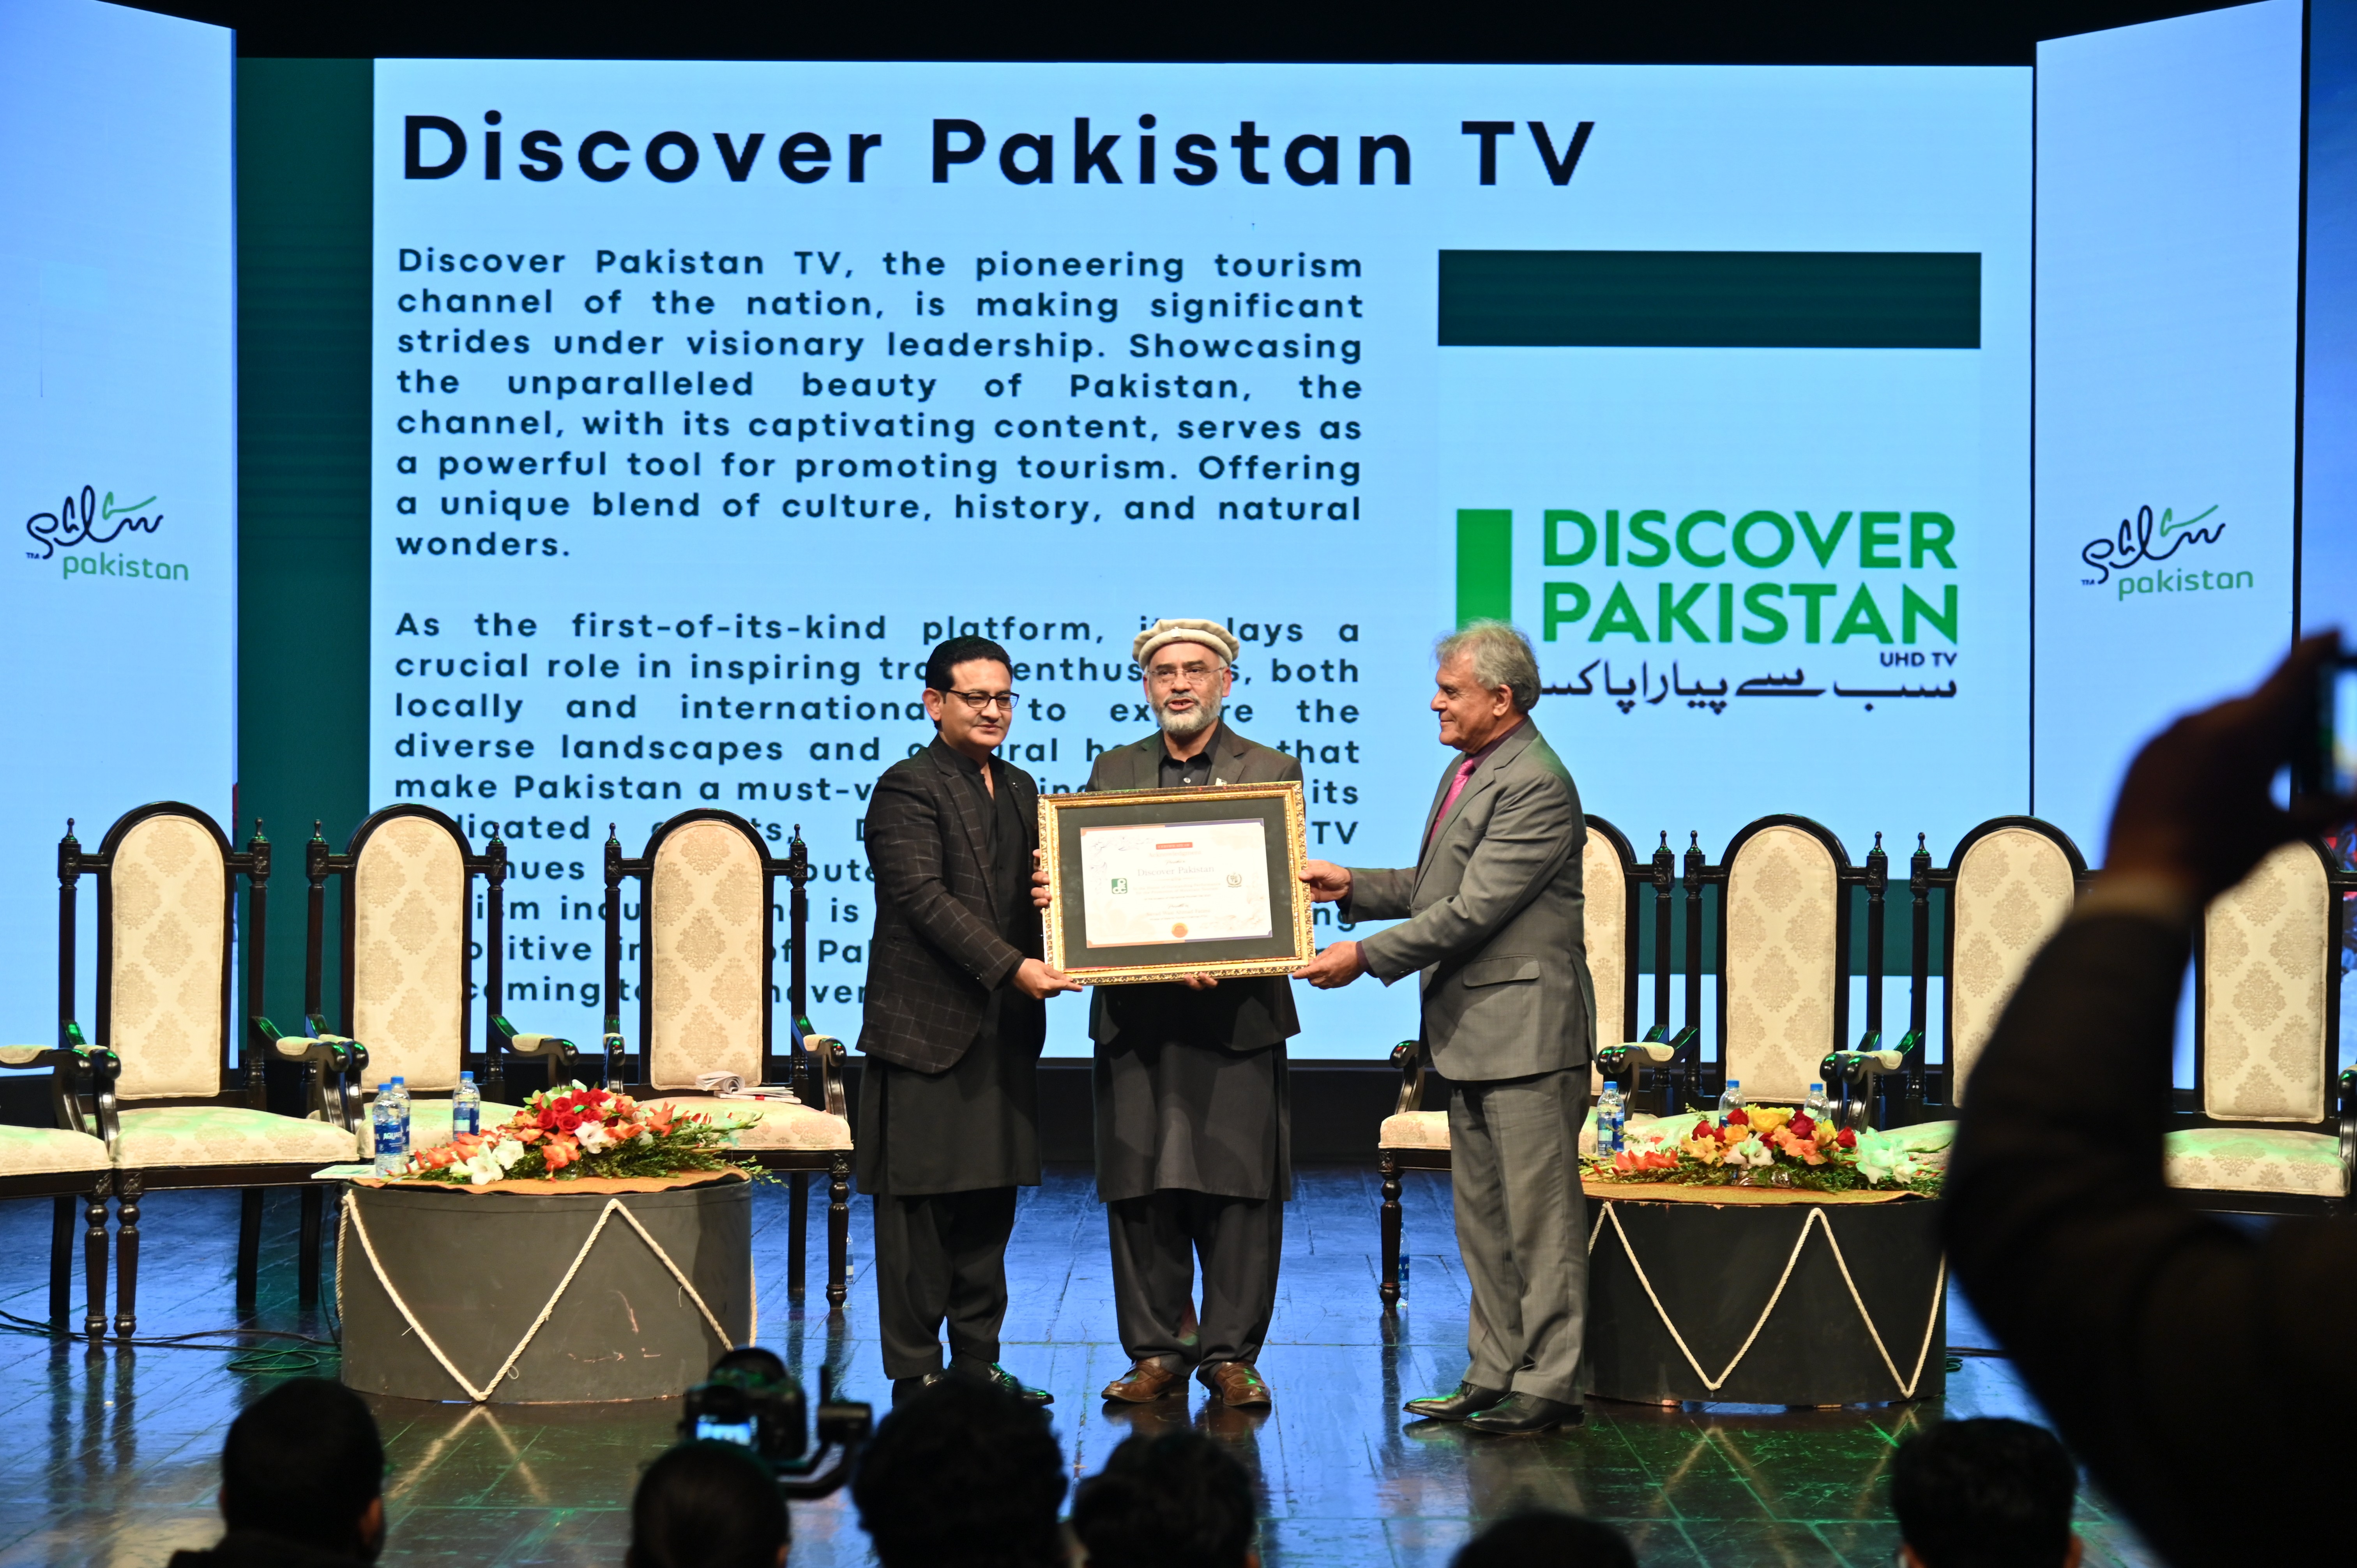 The certificate of acknowledgment presented to Discover Pakistan TV, the pioneering Tourism Channel of the Nation